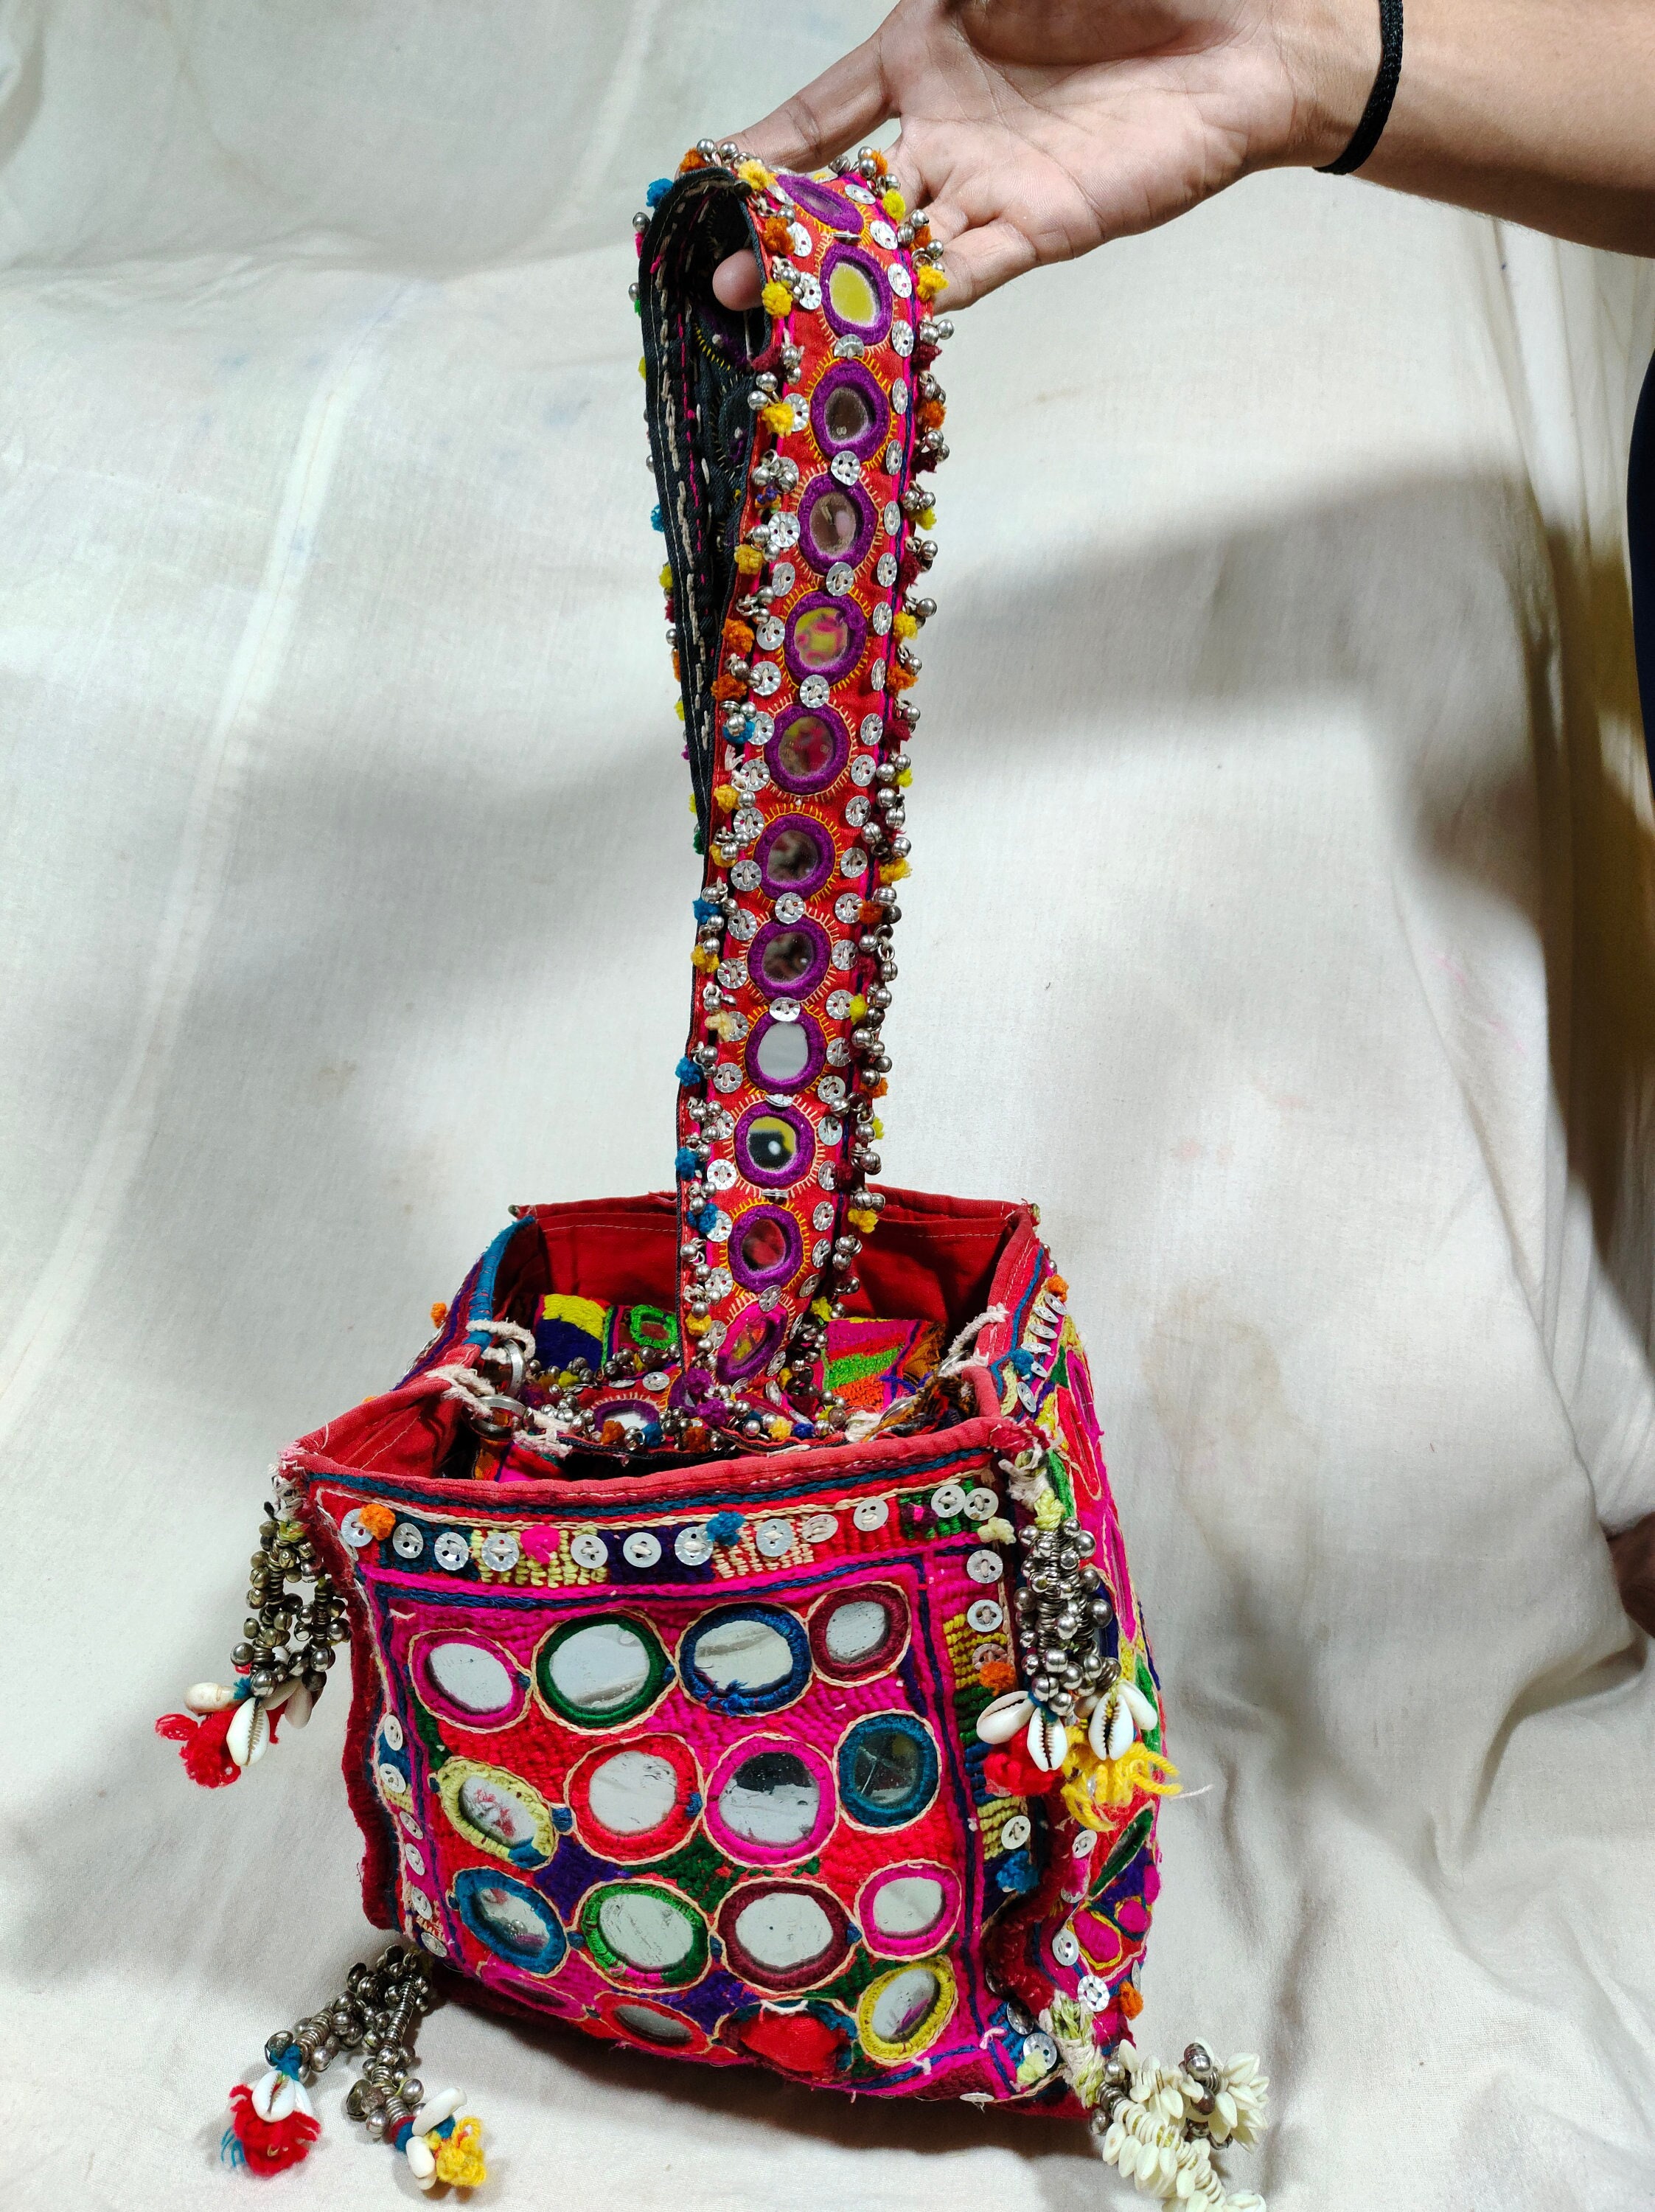 Embroidery Work Bags In Gandhinagar - Prices, Manufacturers & Suppliers